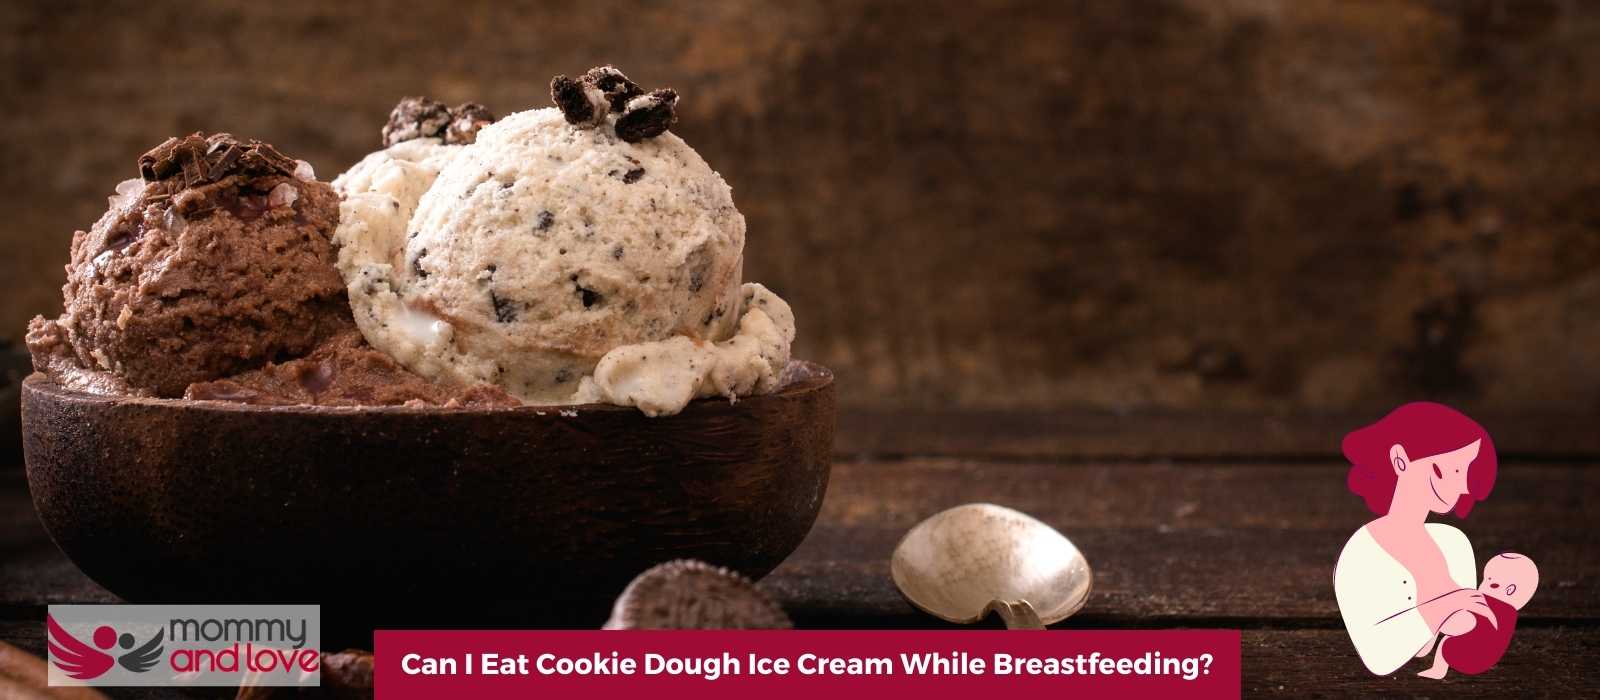 Can I Eat Cookie Dough Ice Cream While Breastfeeding?